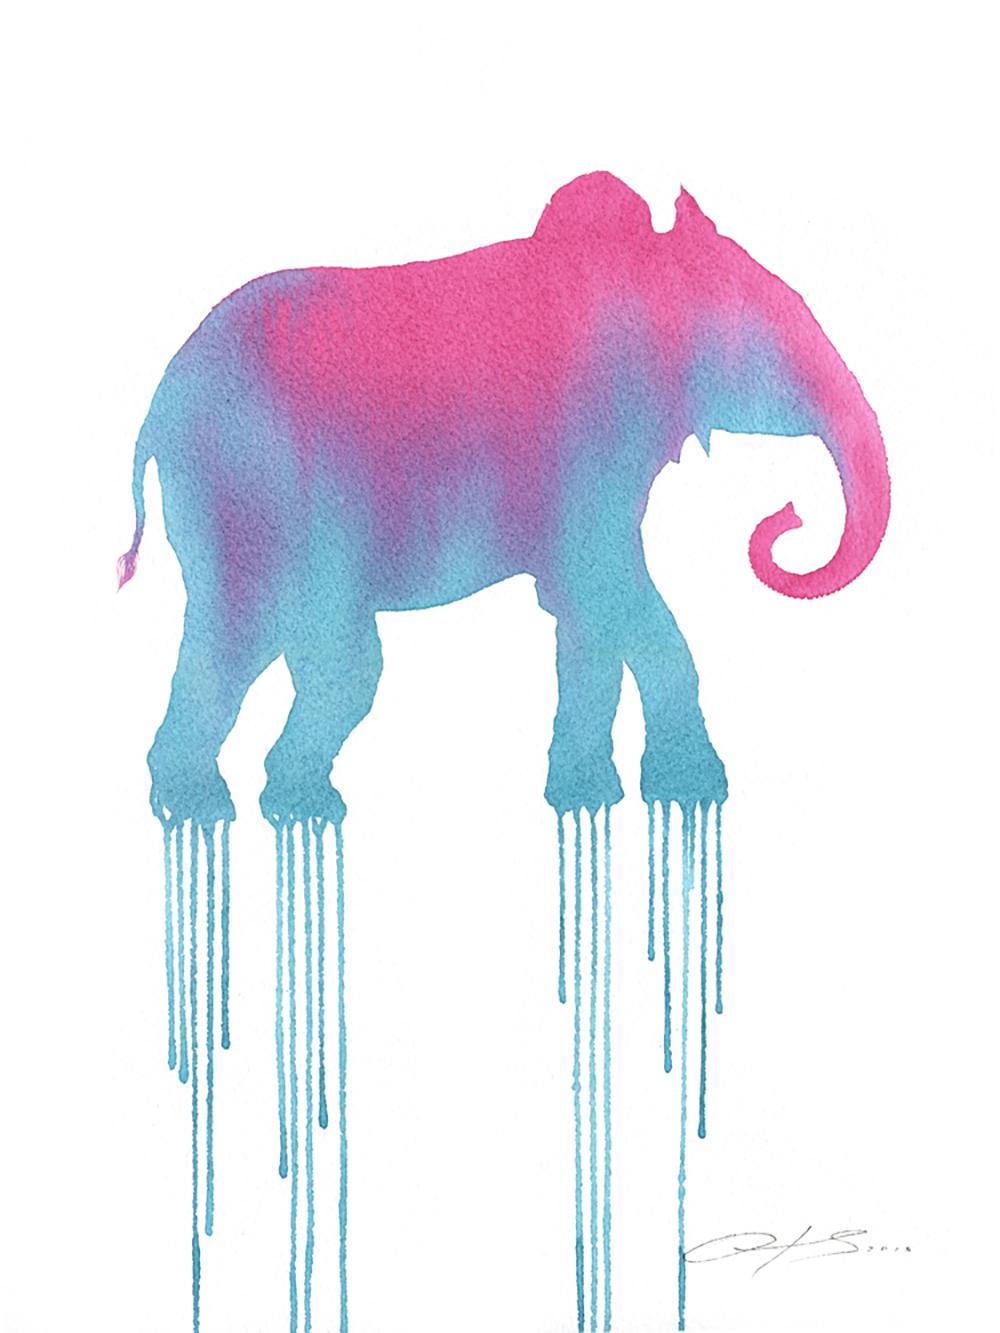 Oliver Flores Animal Painting - "Pink Elephant", watercolor & pencil blue moose on watercolor paper